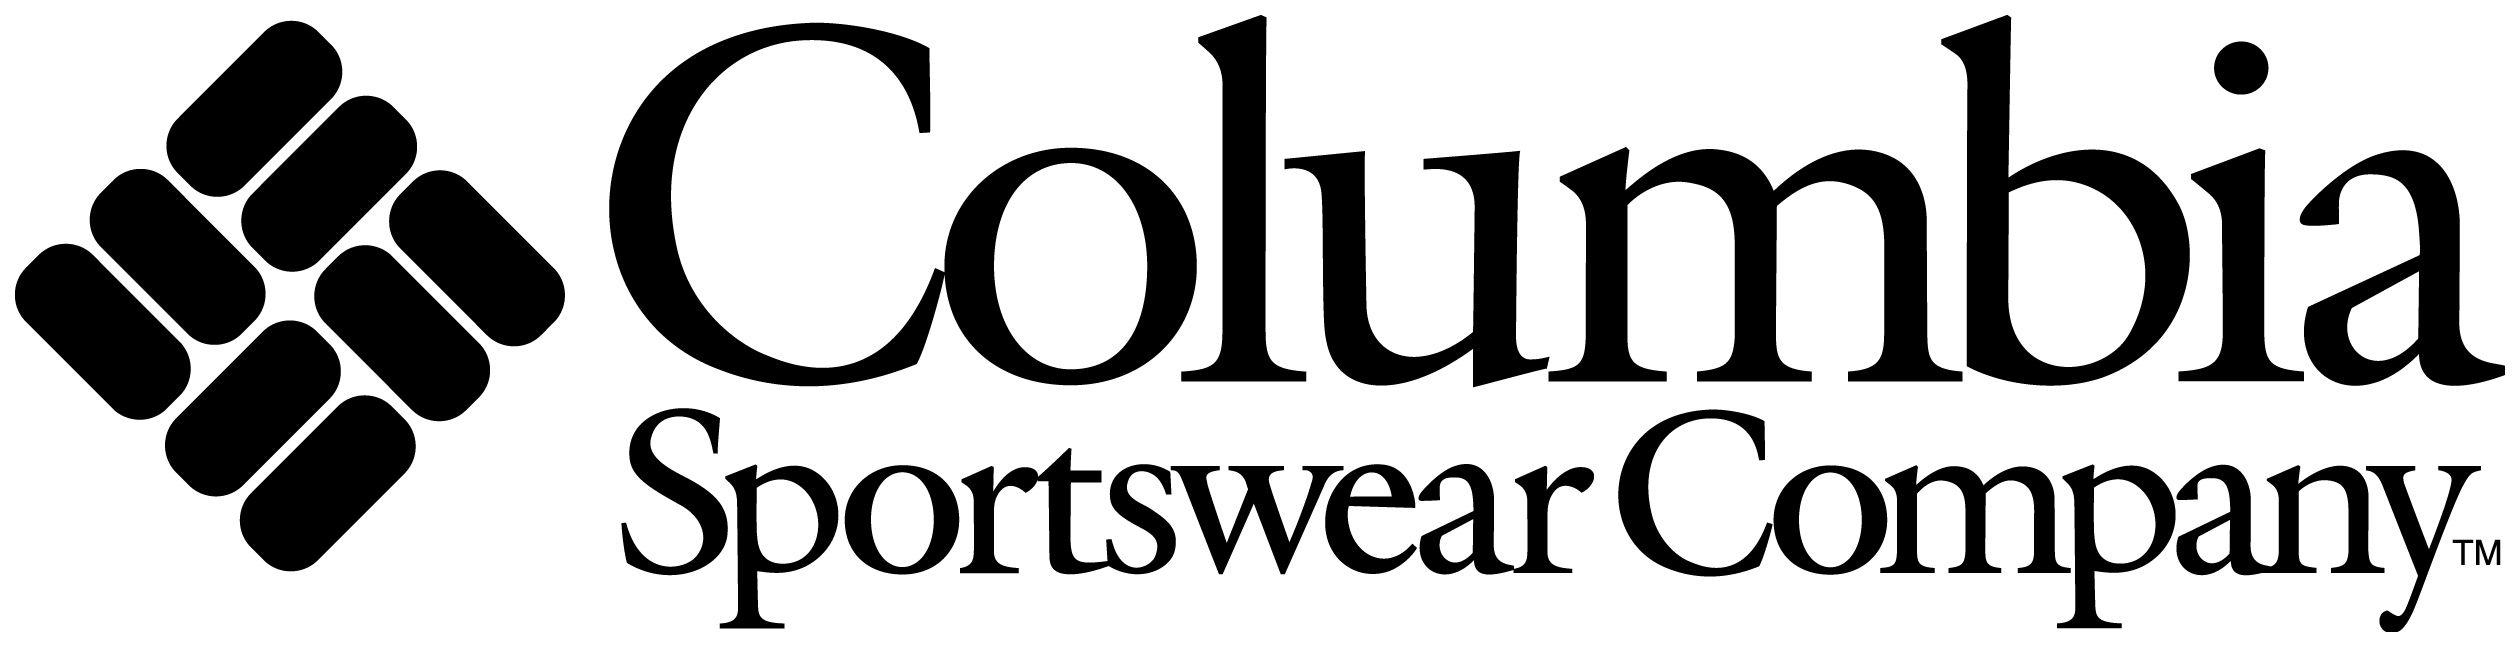 Outdoor Apparel Sportswear Company Logo - Columbia Sportswear Company Announces Appointment of Director Of